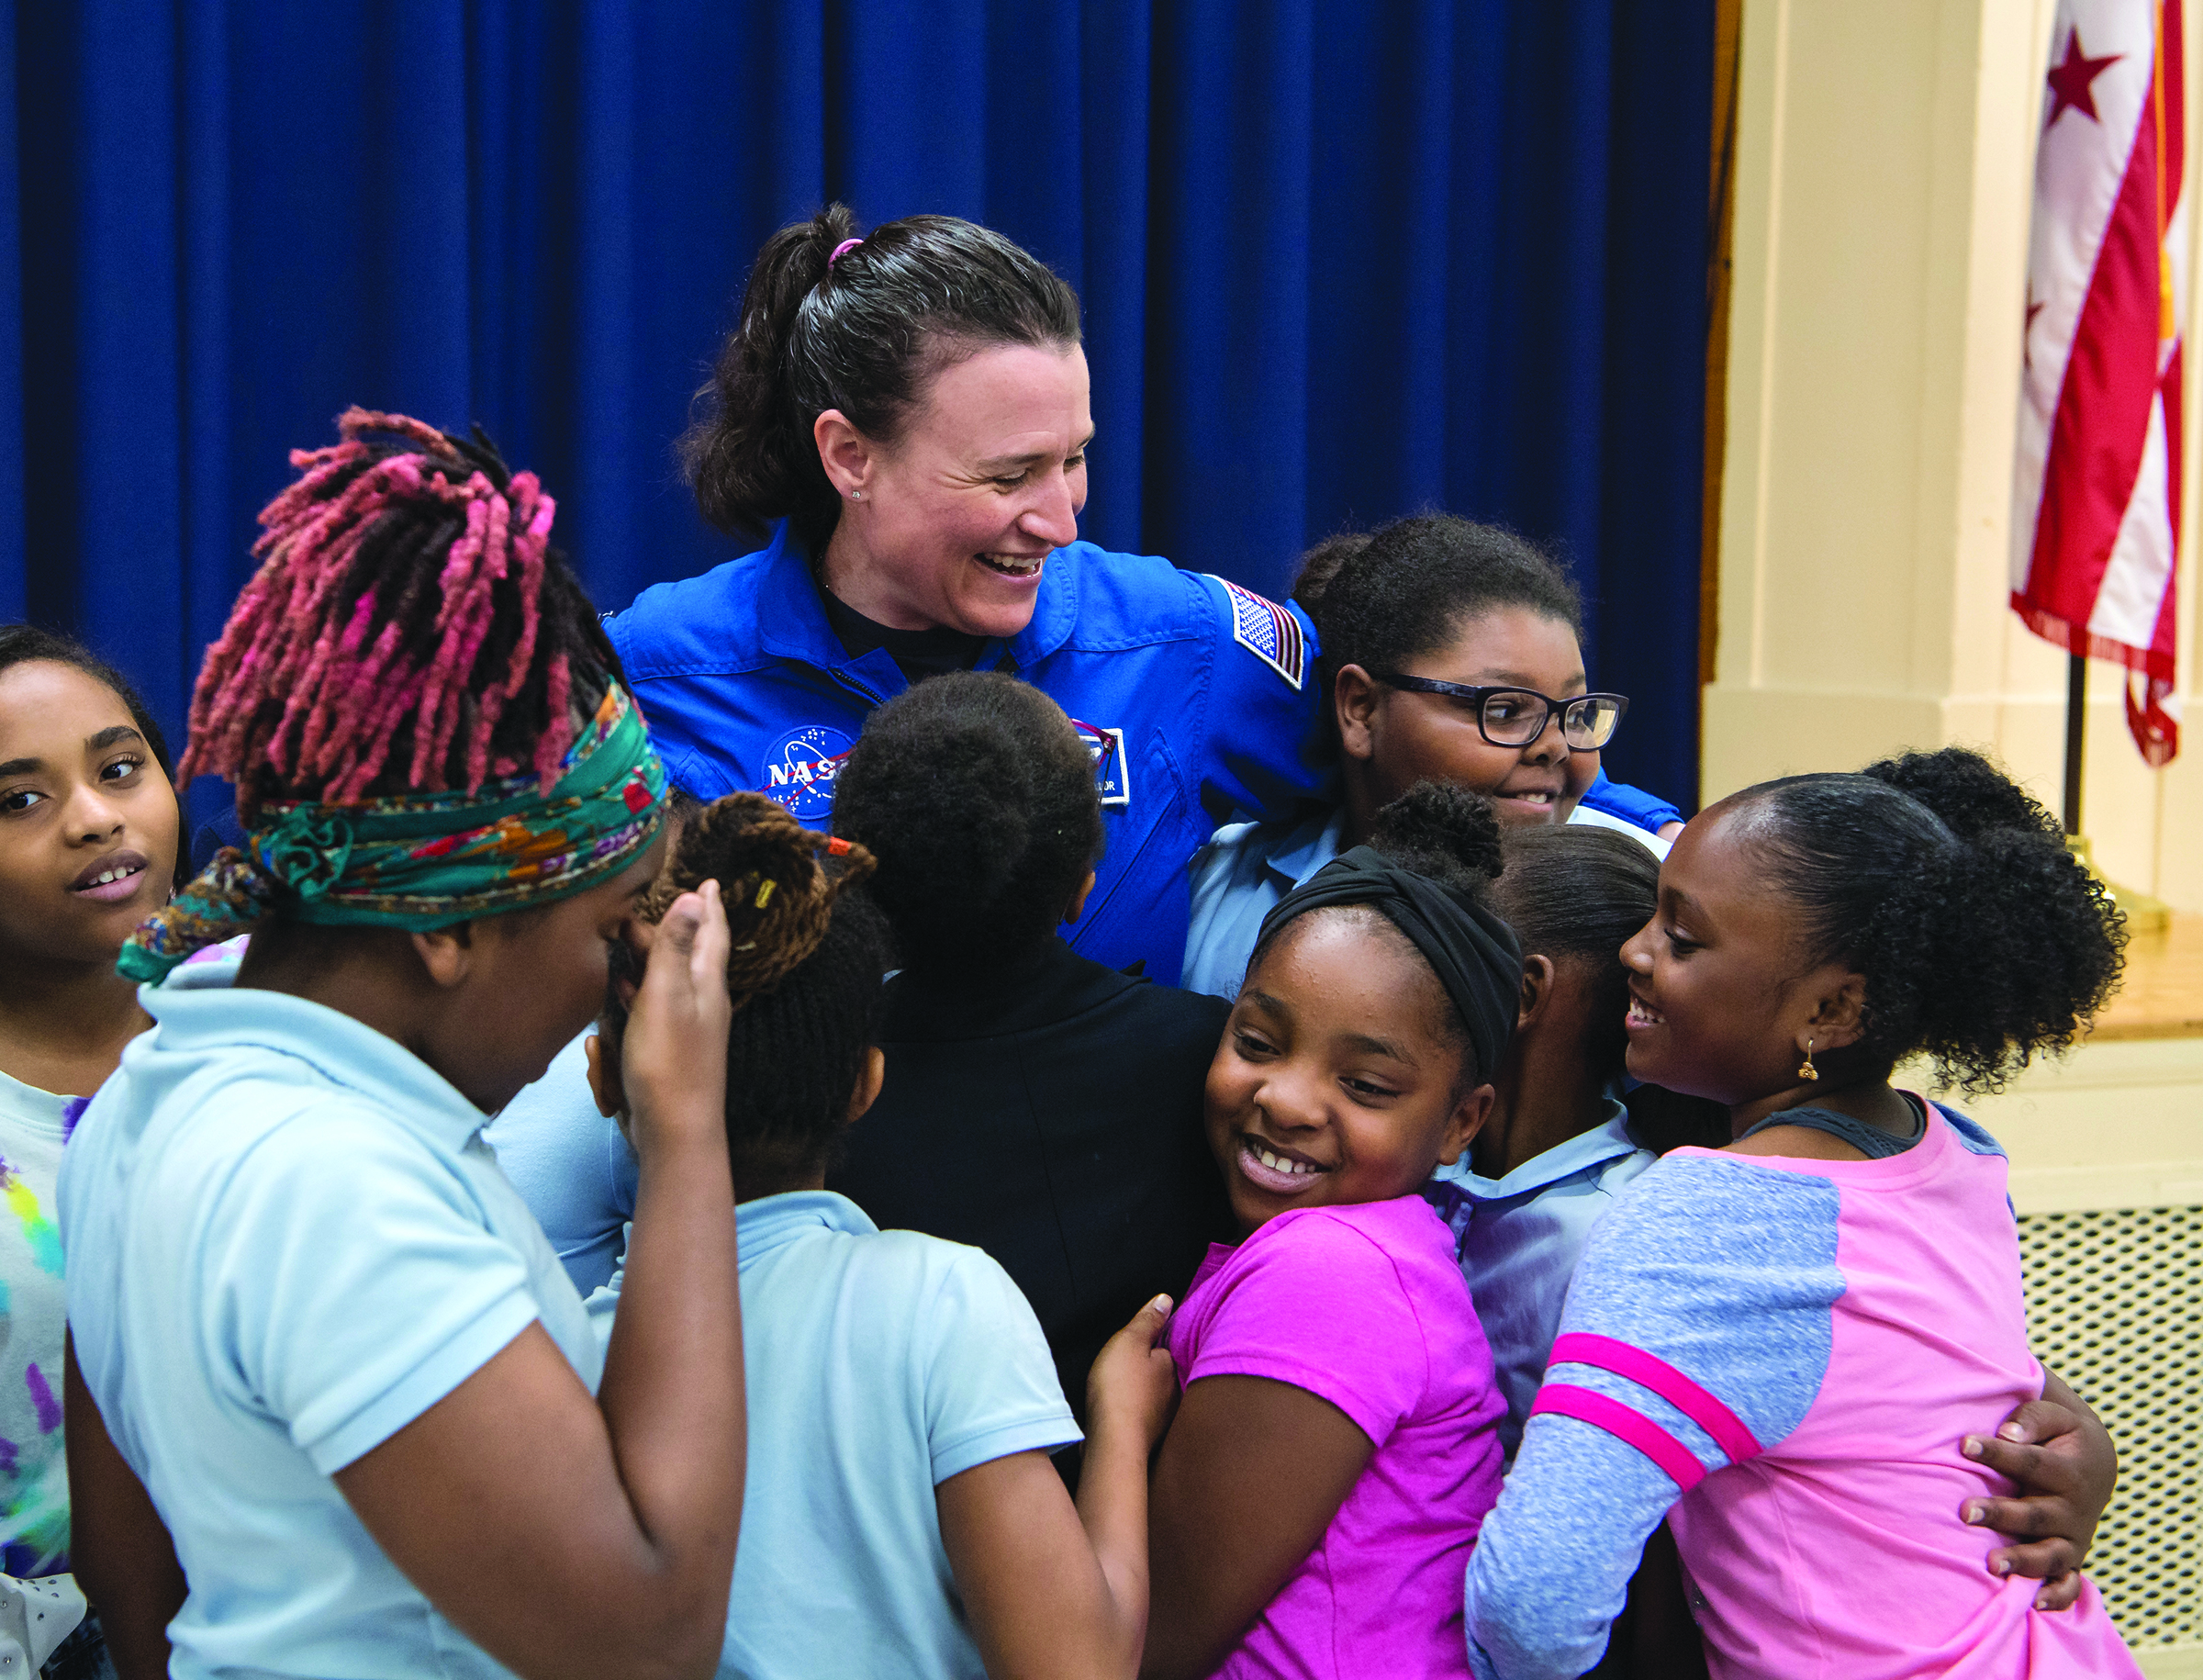 Source: NASA, Students greet a NASA astronaut after a presentation about her International Space Station experience.